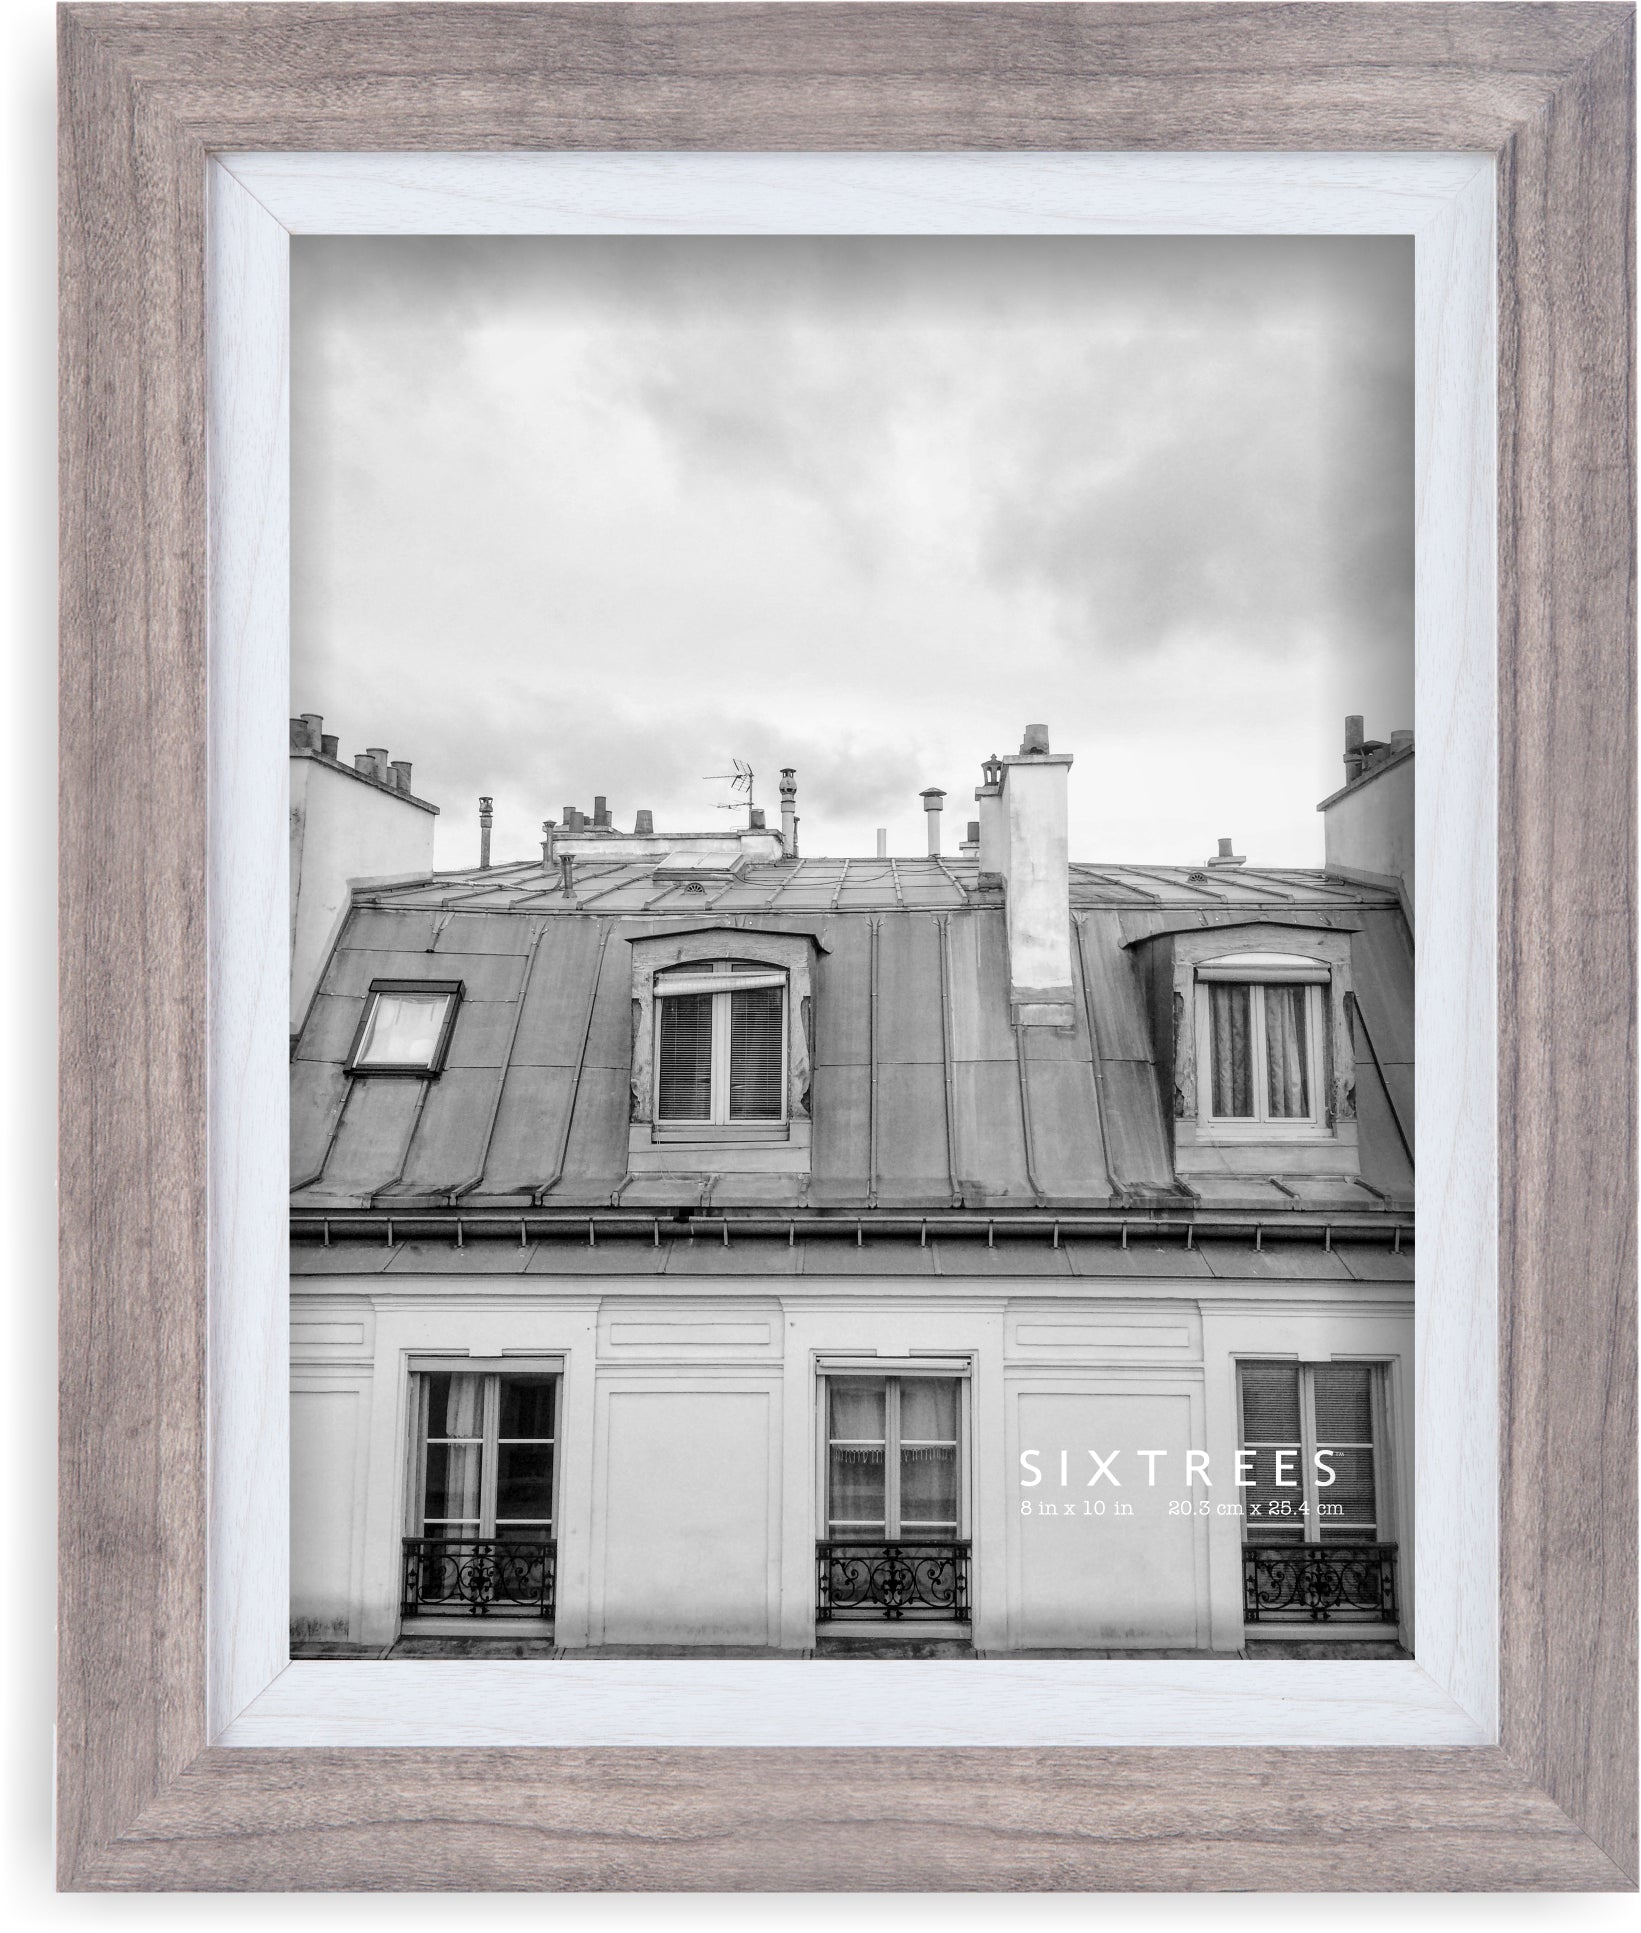 Ethan Wood Matted Picture Frame - 16X20 or 11X14 - Black, White, Grey, –  Sixtrees